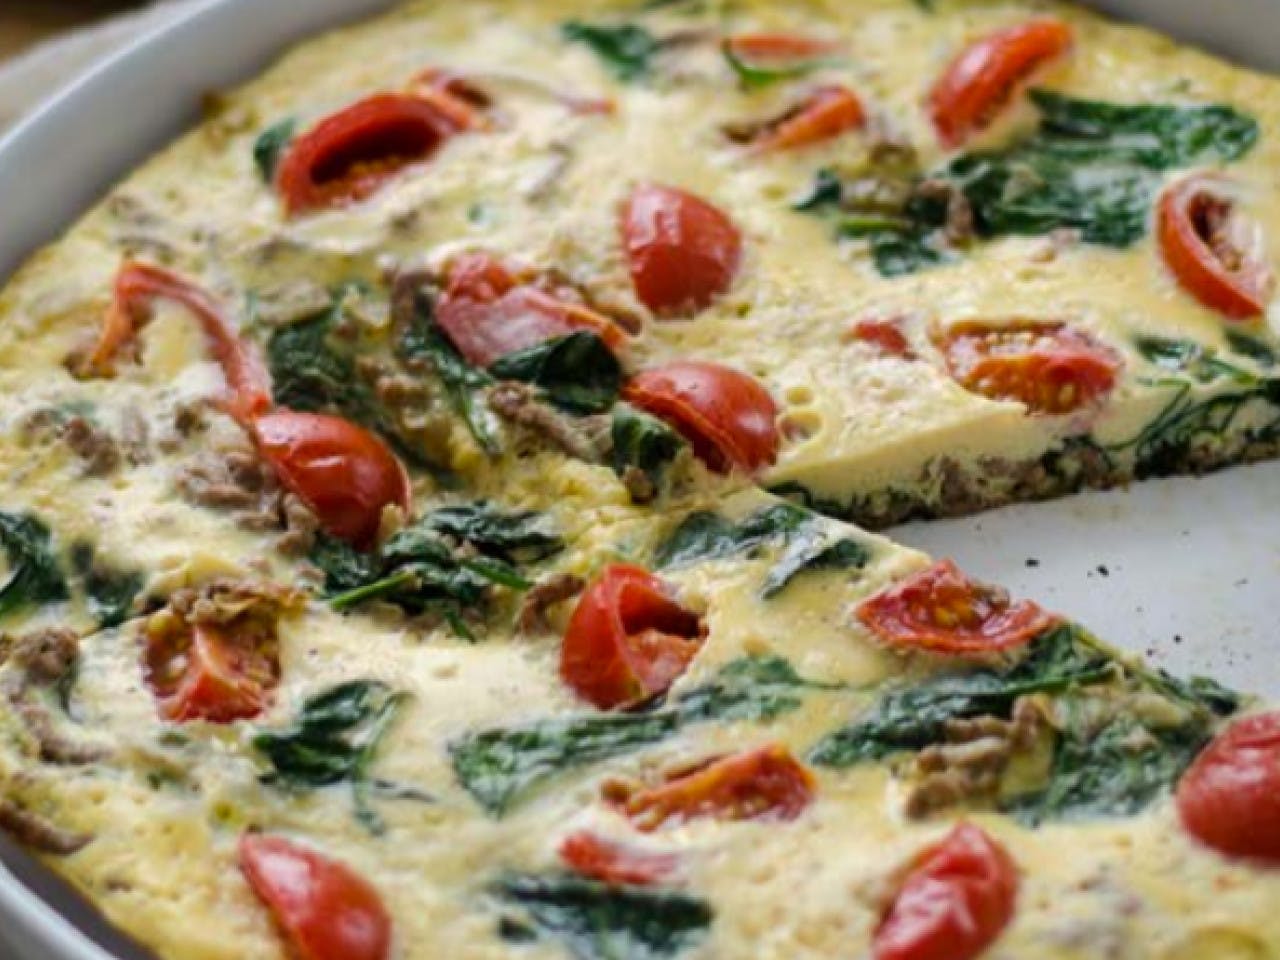 Minced meat spinach frittata